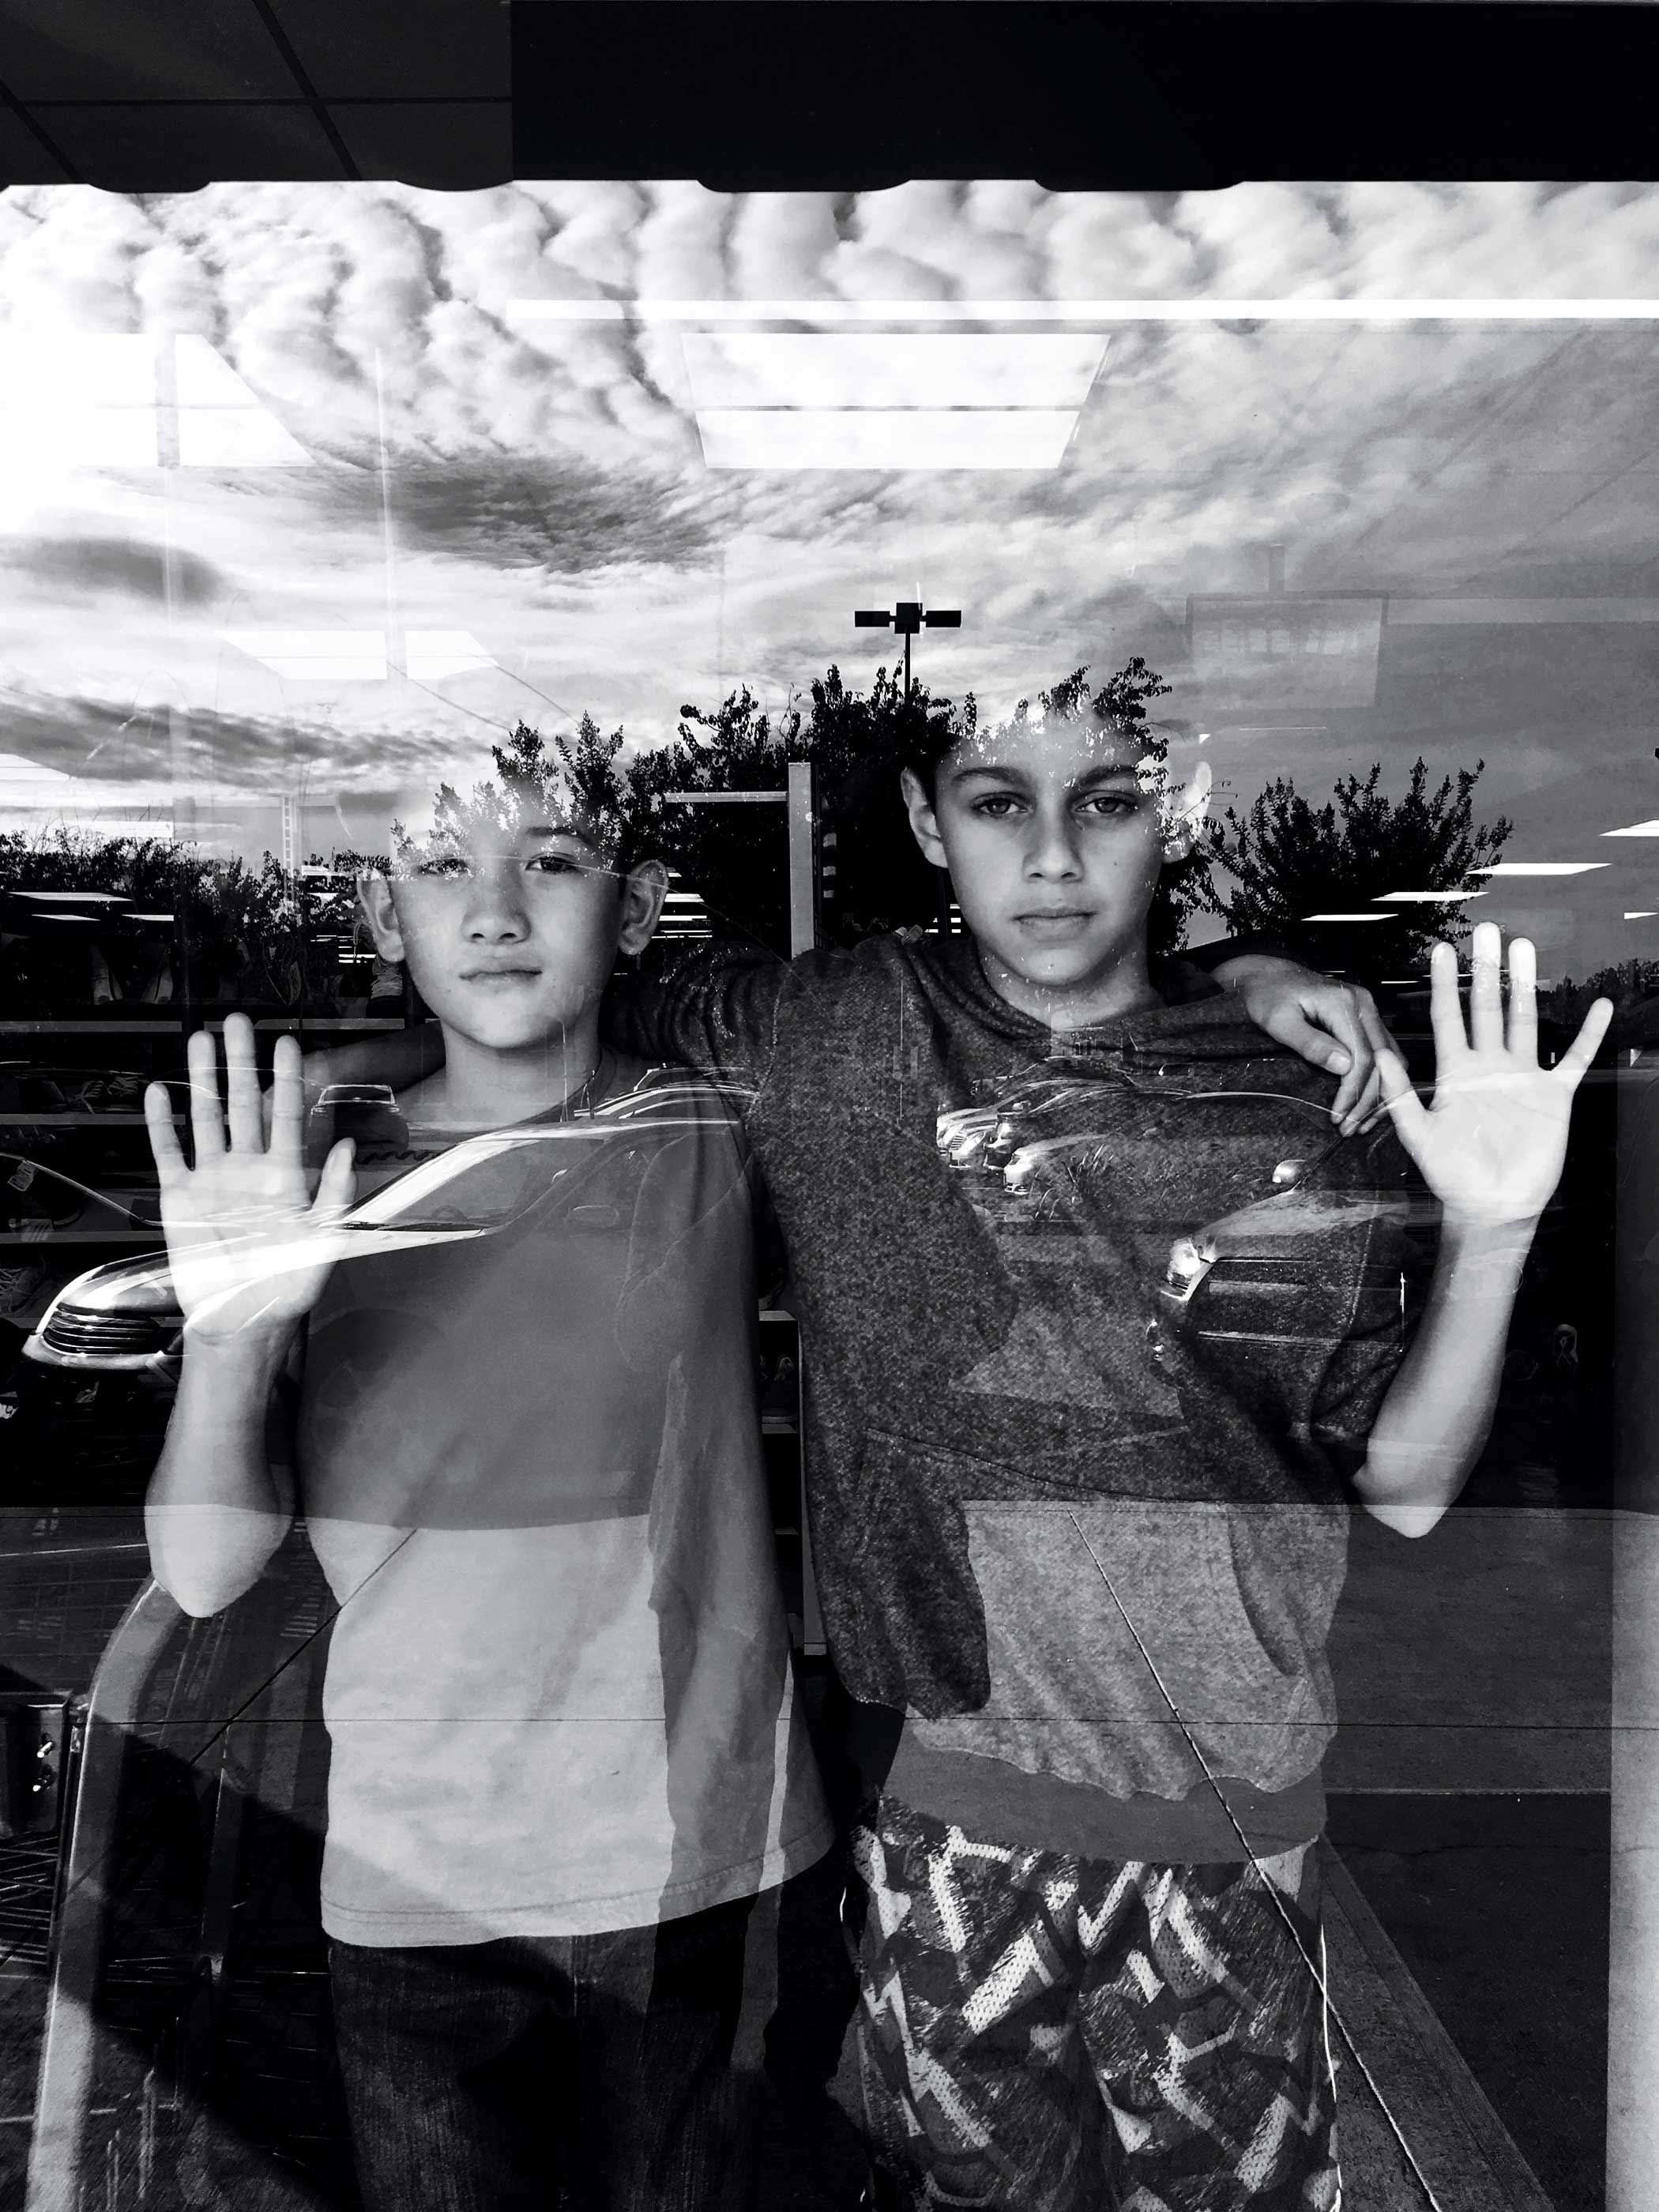 Location: Strip Mall in Castro Valley, CA Subject: son and friend Photograph shot with iPhone 6s, used VSCO